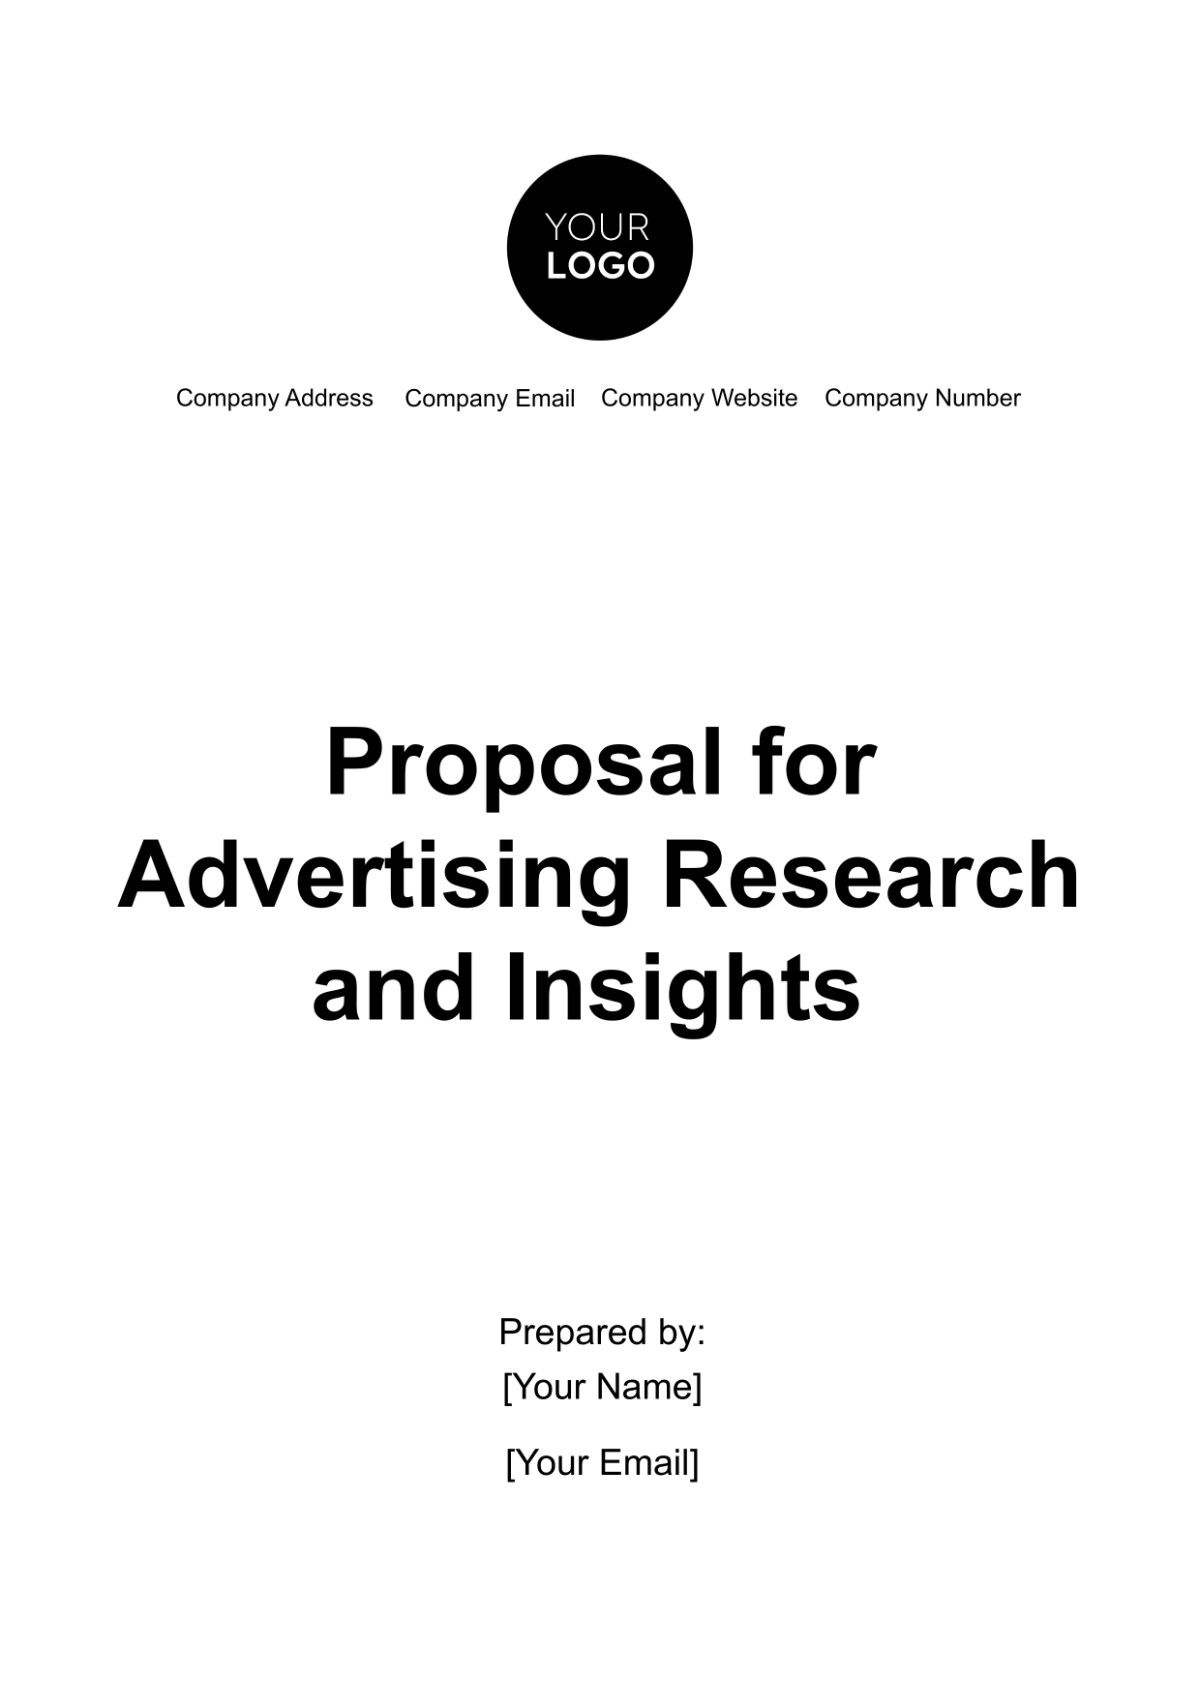 Proposal for Advertising Research and Insights Template